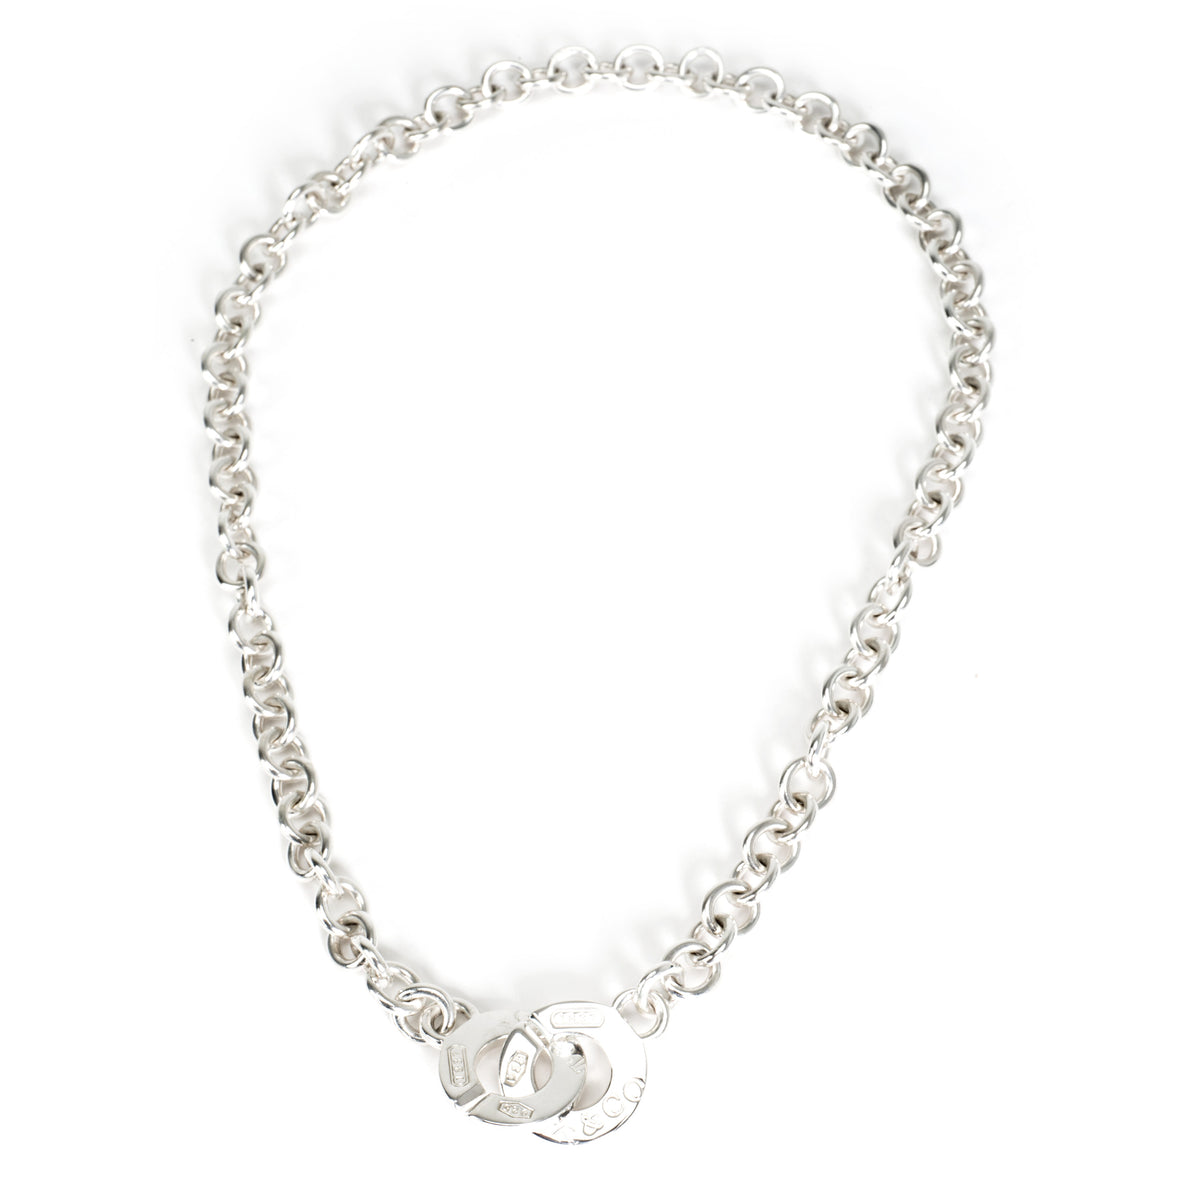 Tiffany & Co. 1837 Interlocking Circles Necklace in  Sterling Silver